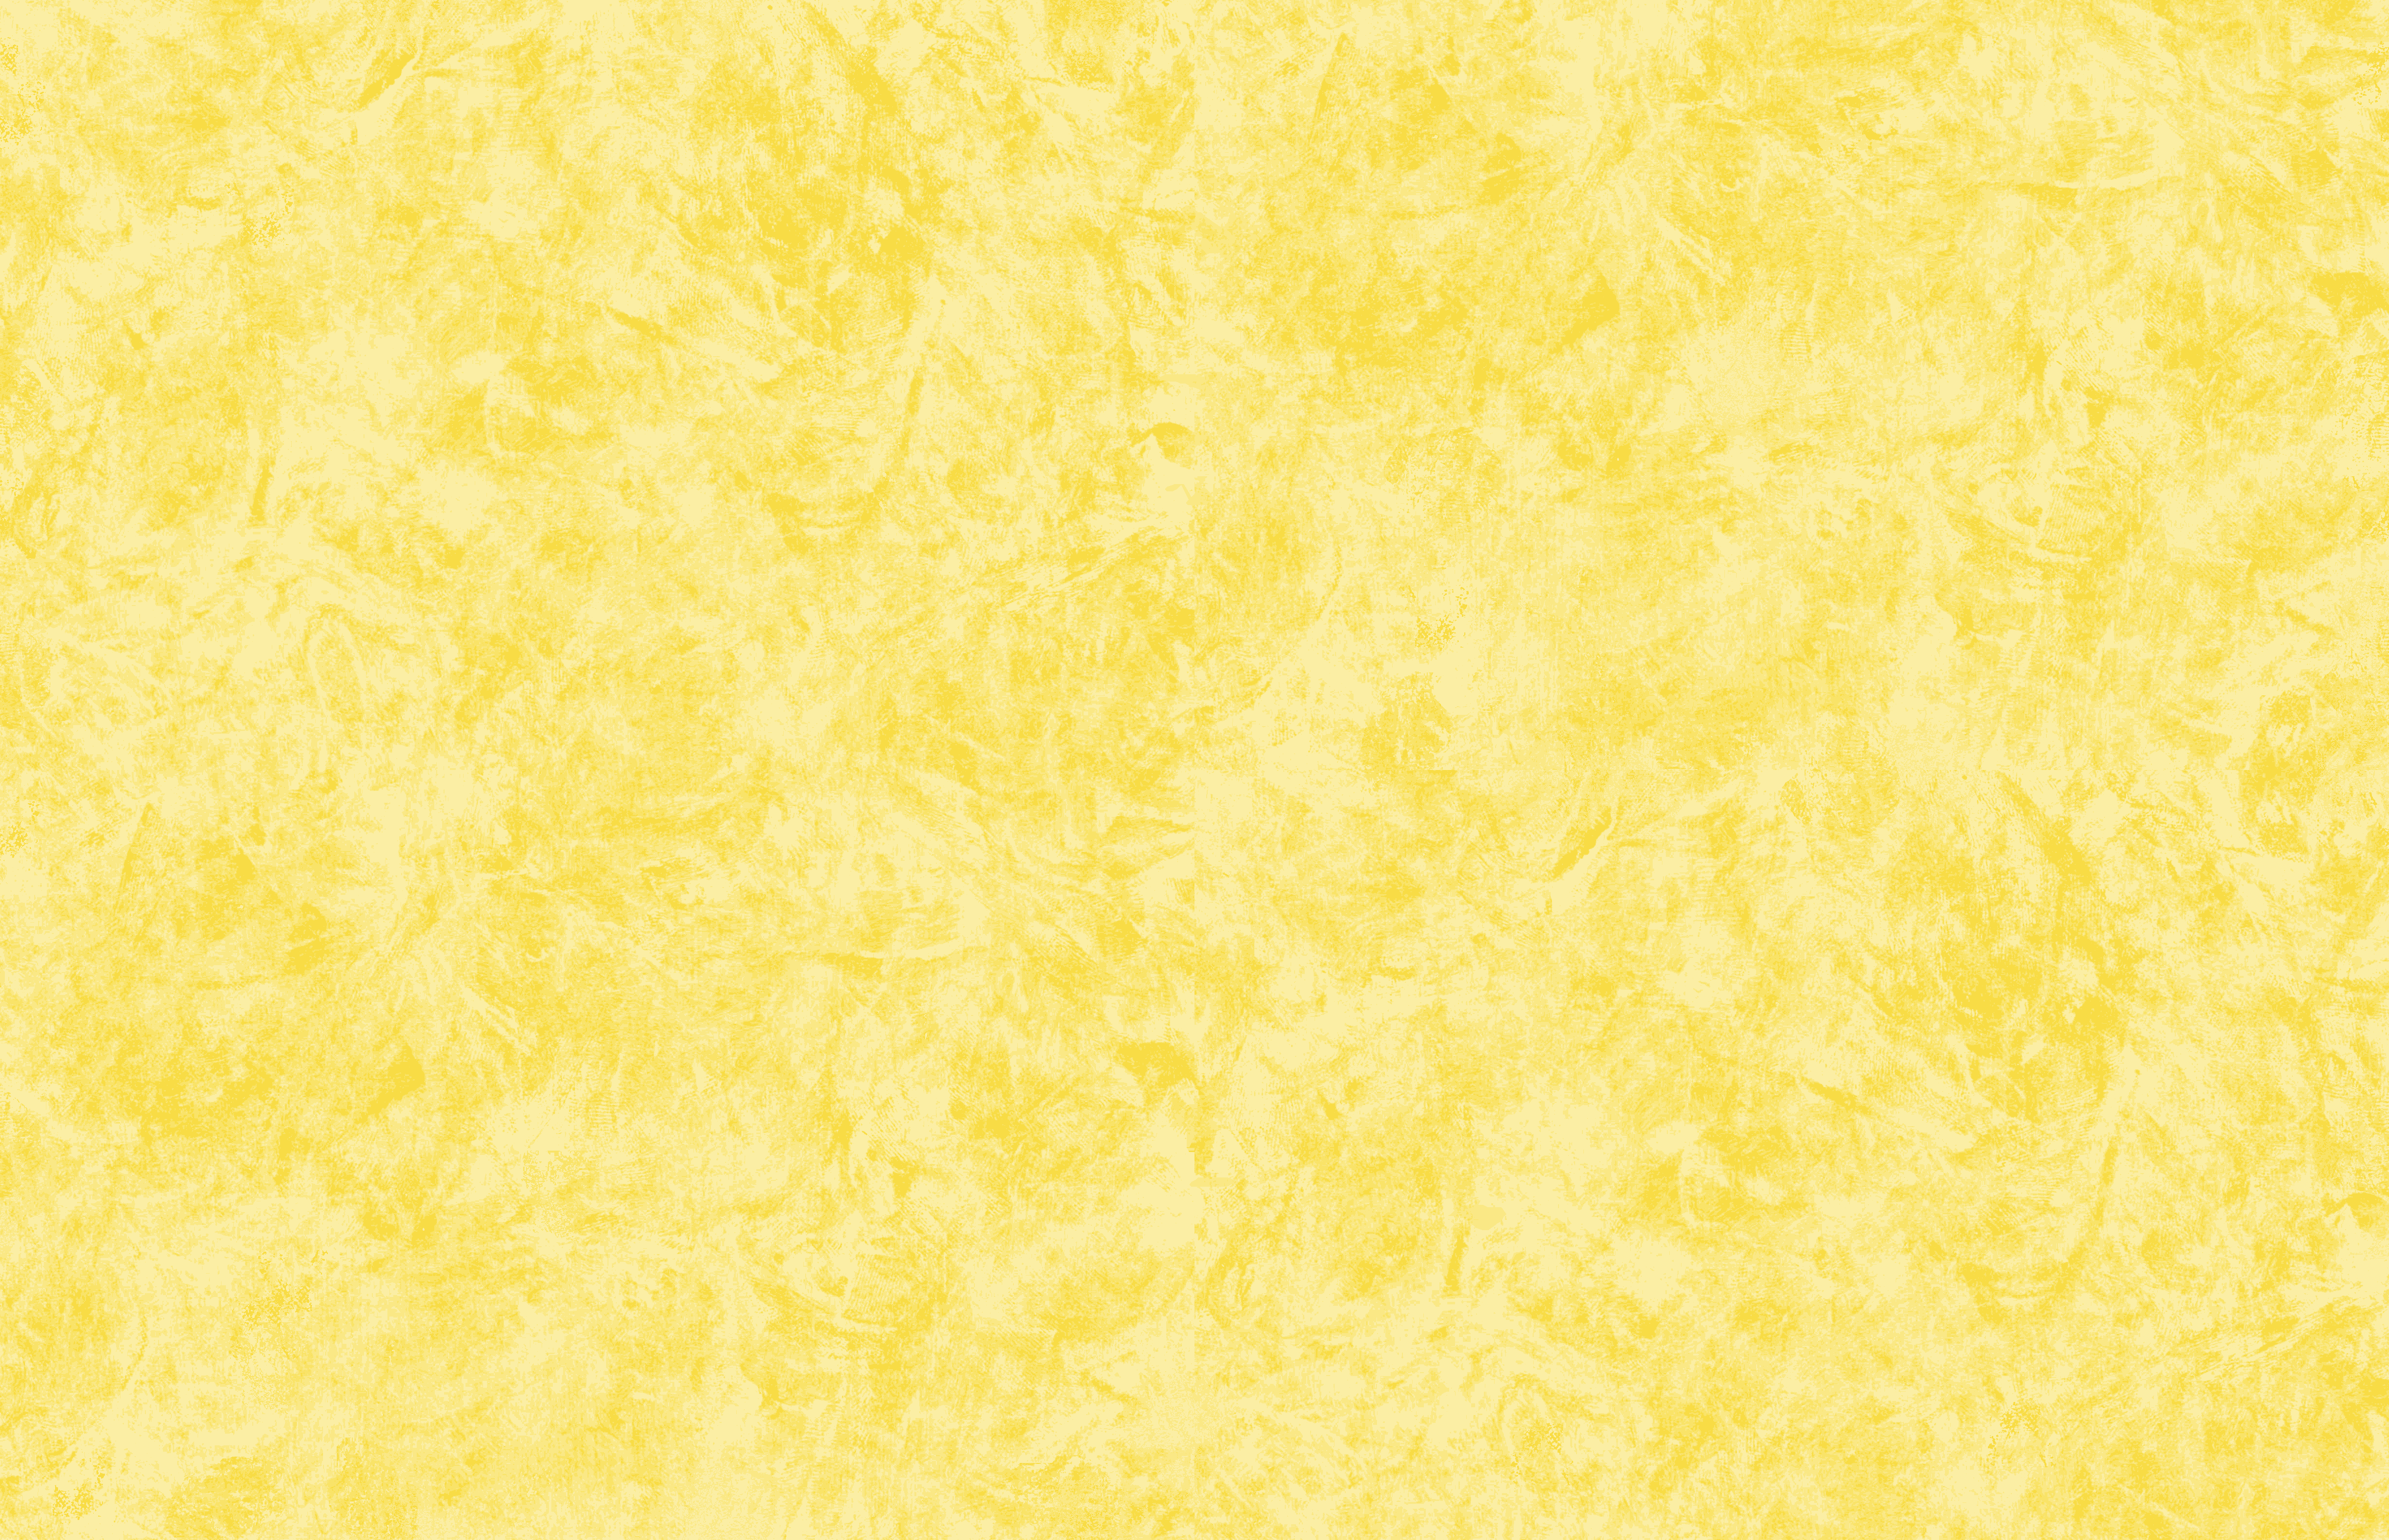 Waverly Inspirations Cotton 44" Batik Yellow Color Sewing Fabric by the Yard